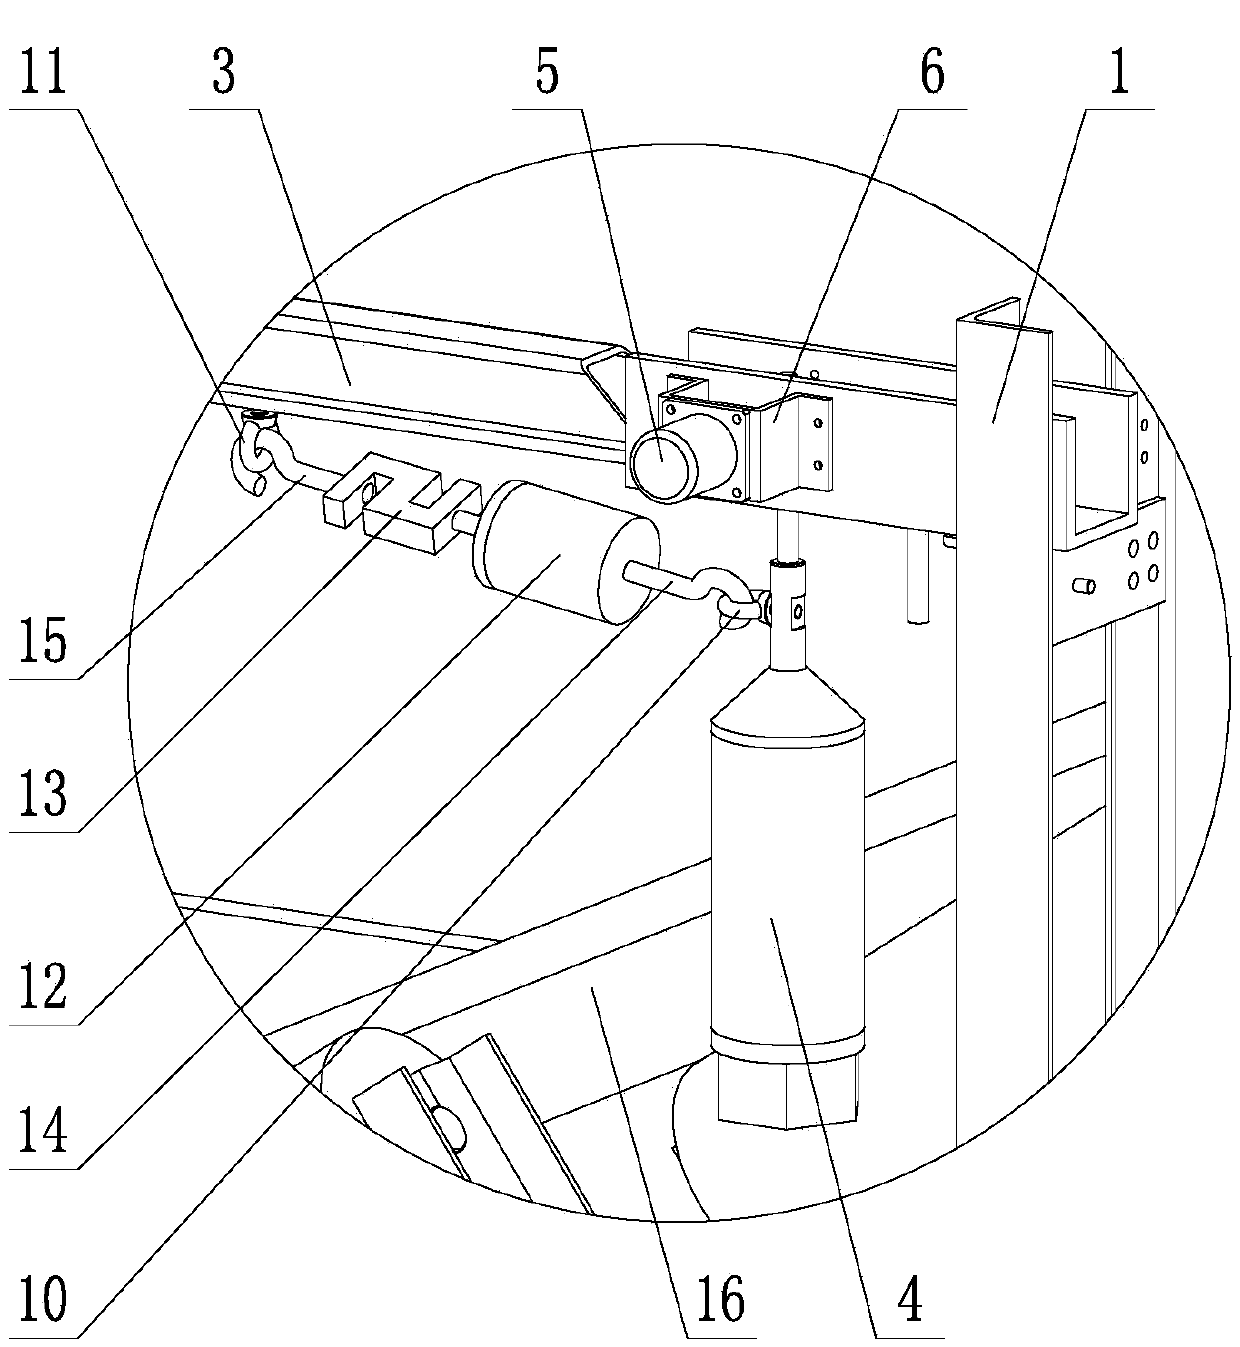 Packaging tape deviation self-checking device suitable for packaging tape conveyor